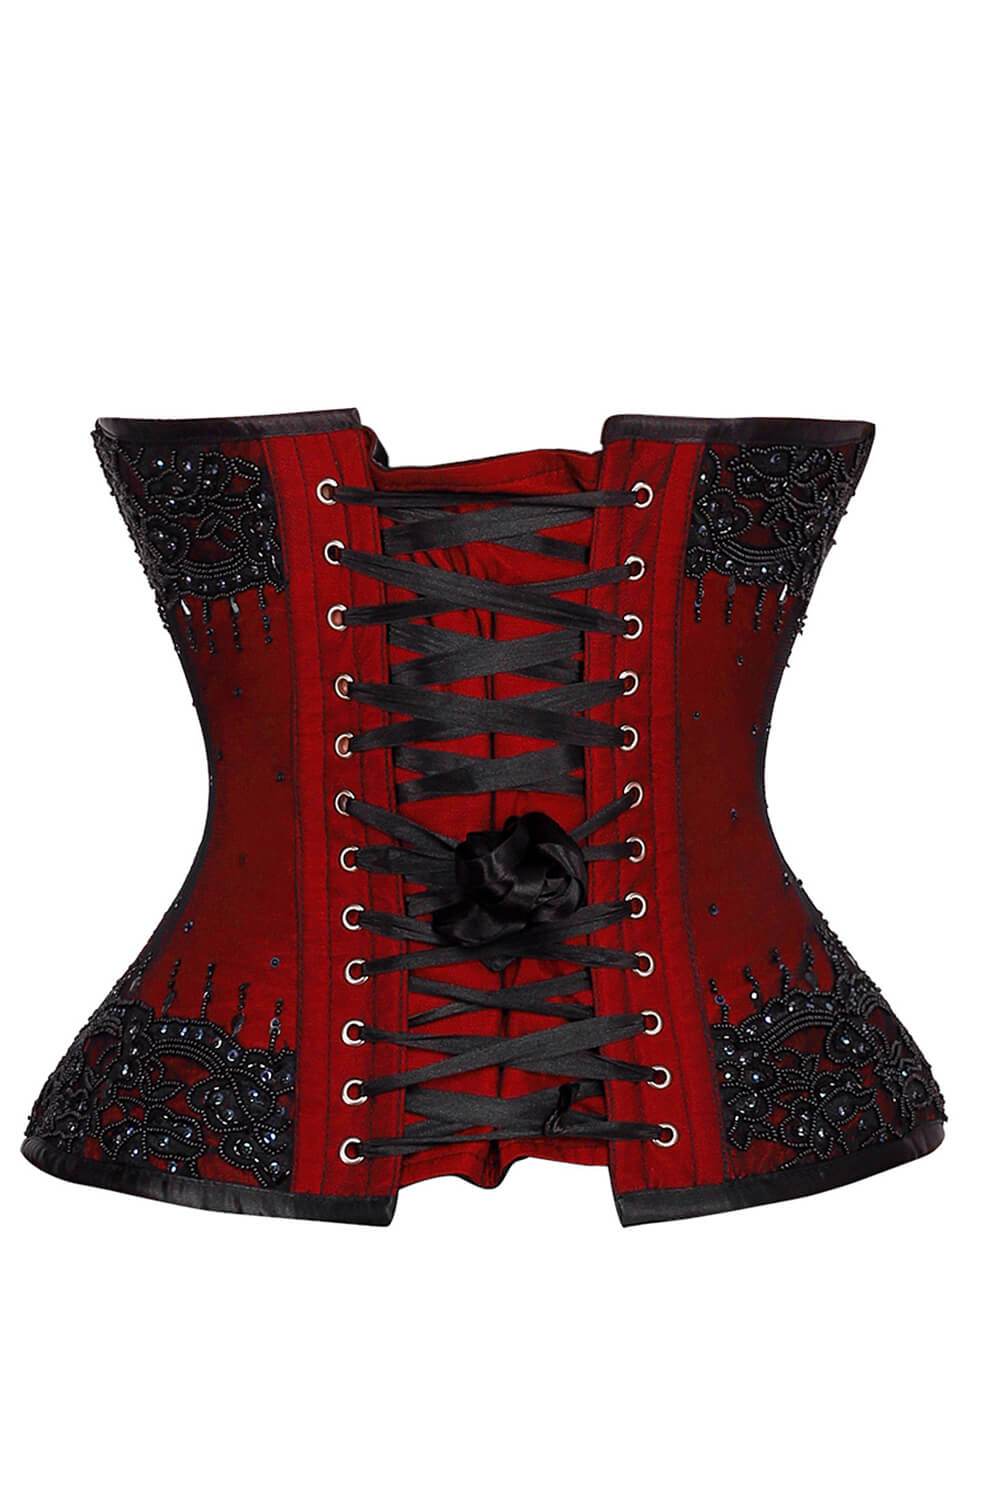 The back of the red and black Beaded Lace Overlay Couture Corset.